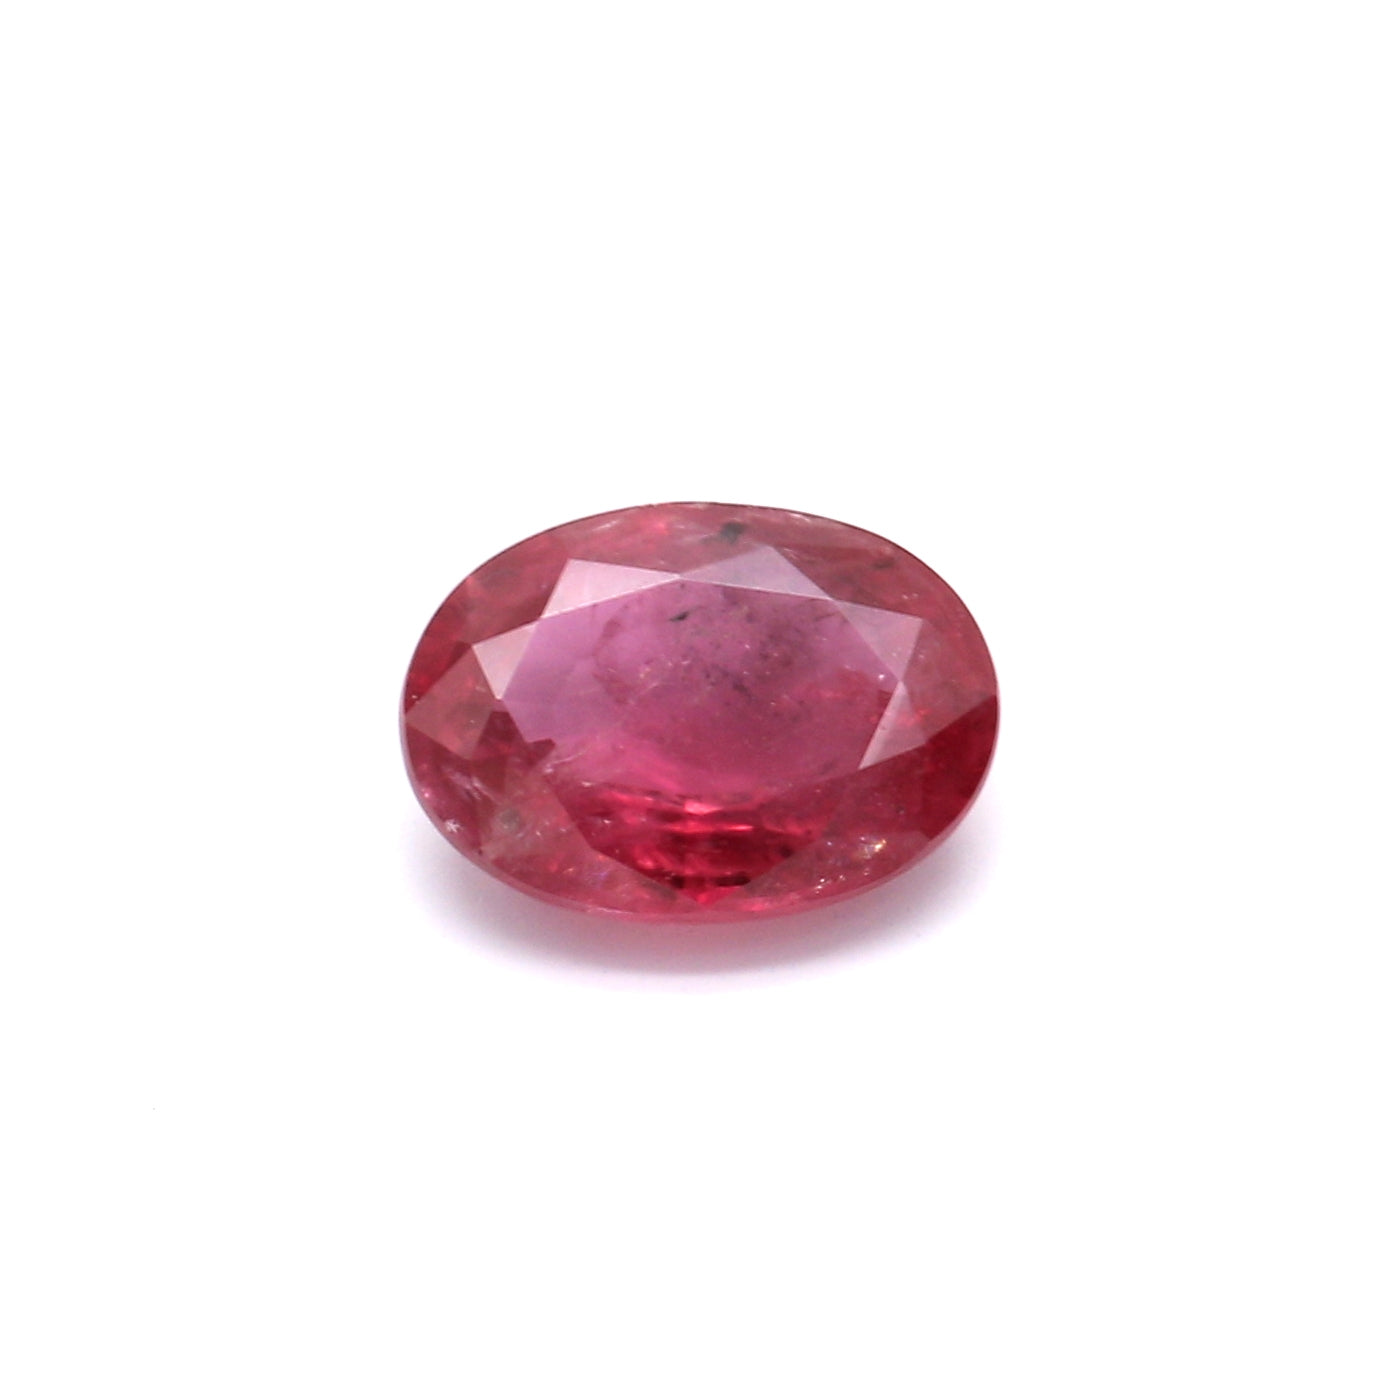 0.95ct Pinkish Red, Oval Ruby, H(a), Thailand - 6.93 x 5.03 x 2.81mm